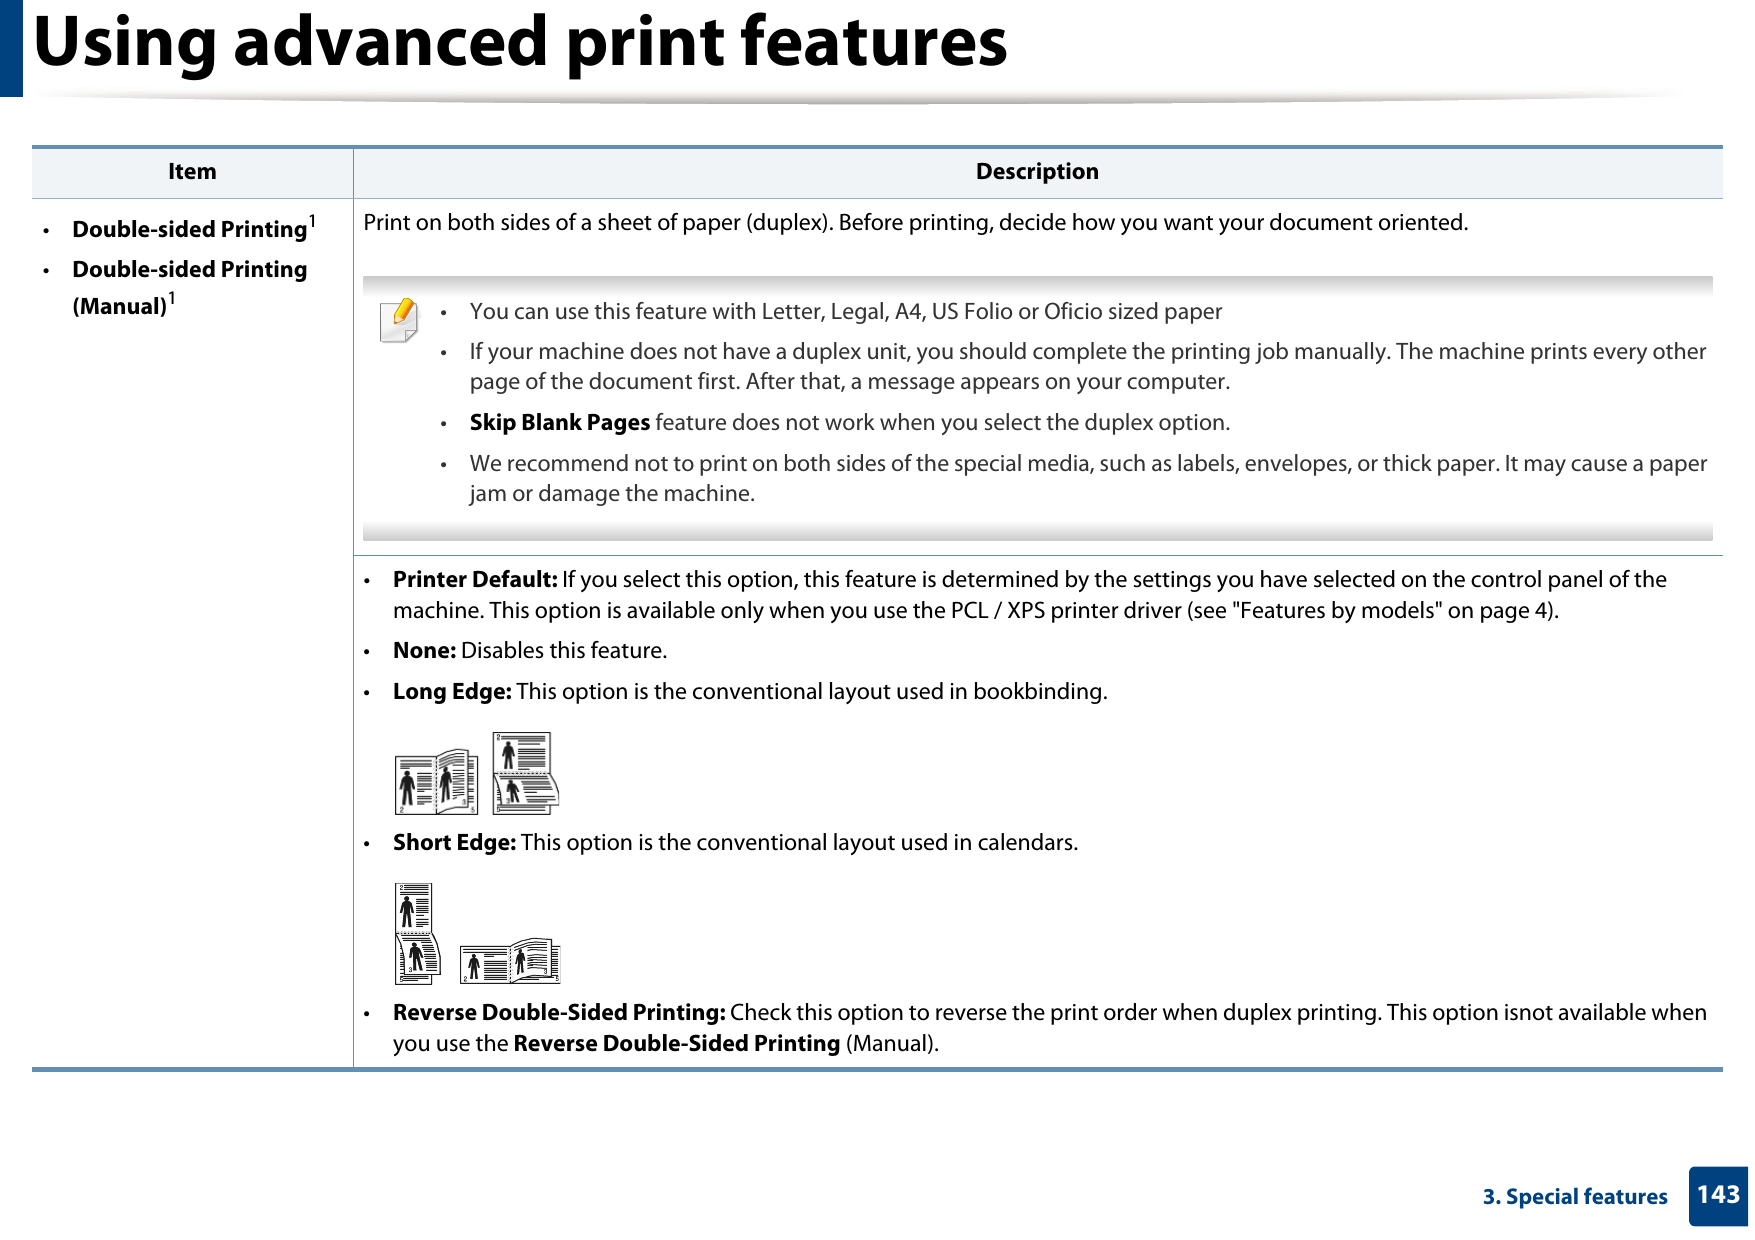 Using advanced print features1433. Special features•Double-sided Printing1•Double-sided Printing (Manual)1Print on both sides of a sheet of paper (duplex). Before printing, decide how you want your document oriented.  • You can use this feature with Letter, Legal, A4, US Folio or Oficio sized paper • If your machine does not have a duplex unit, you should complete the printing job manually. The machine prints every other page of the document first. After that, a message appears on your computer.•Skip Blank Pages feature does not work when you select the duplex option.• We recommend not to print on both sides of the special media, such as labels, envelopes, or thick paper. It may cause a paper jam or damage the machine. •Printer Default: If you select this option, this feature is determined by the settings you have selected on the control panel of the machine. This option is available only when you use the PCL / XPS printer driver (see &quot;Features by models&quot; on page 4).•None: Disables this feature.•Long Edge: This option is the conventional layout used in bookbinding.•Short Edge: This option is the conventional layout used in calendars.•Reverse Double-Sided Printing: Check this option to reverse the print order when duplex printing. This option isnot available when you use the Reverse Double-Sided Printing (Manual).Item Description